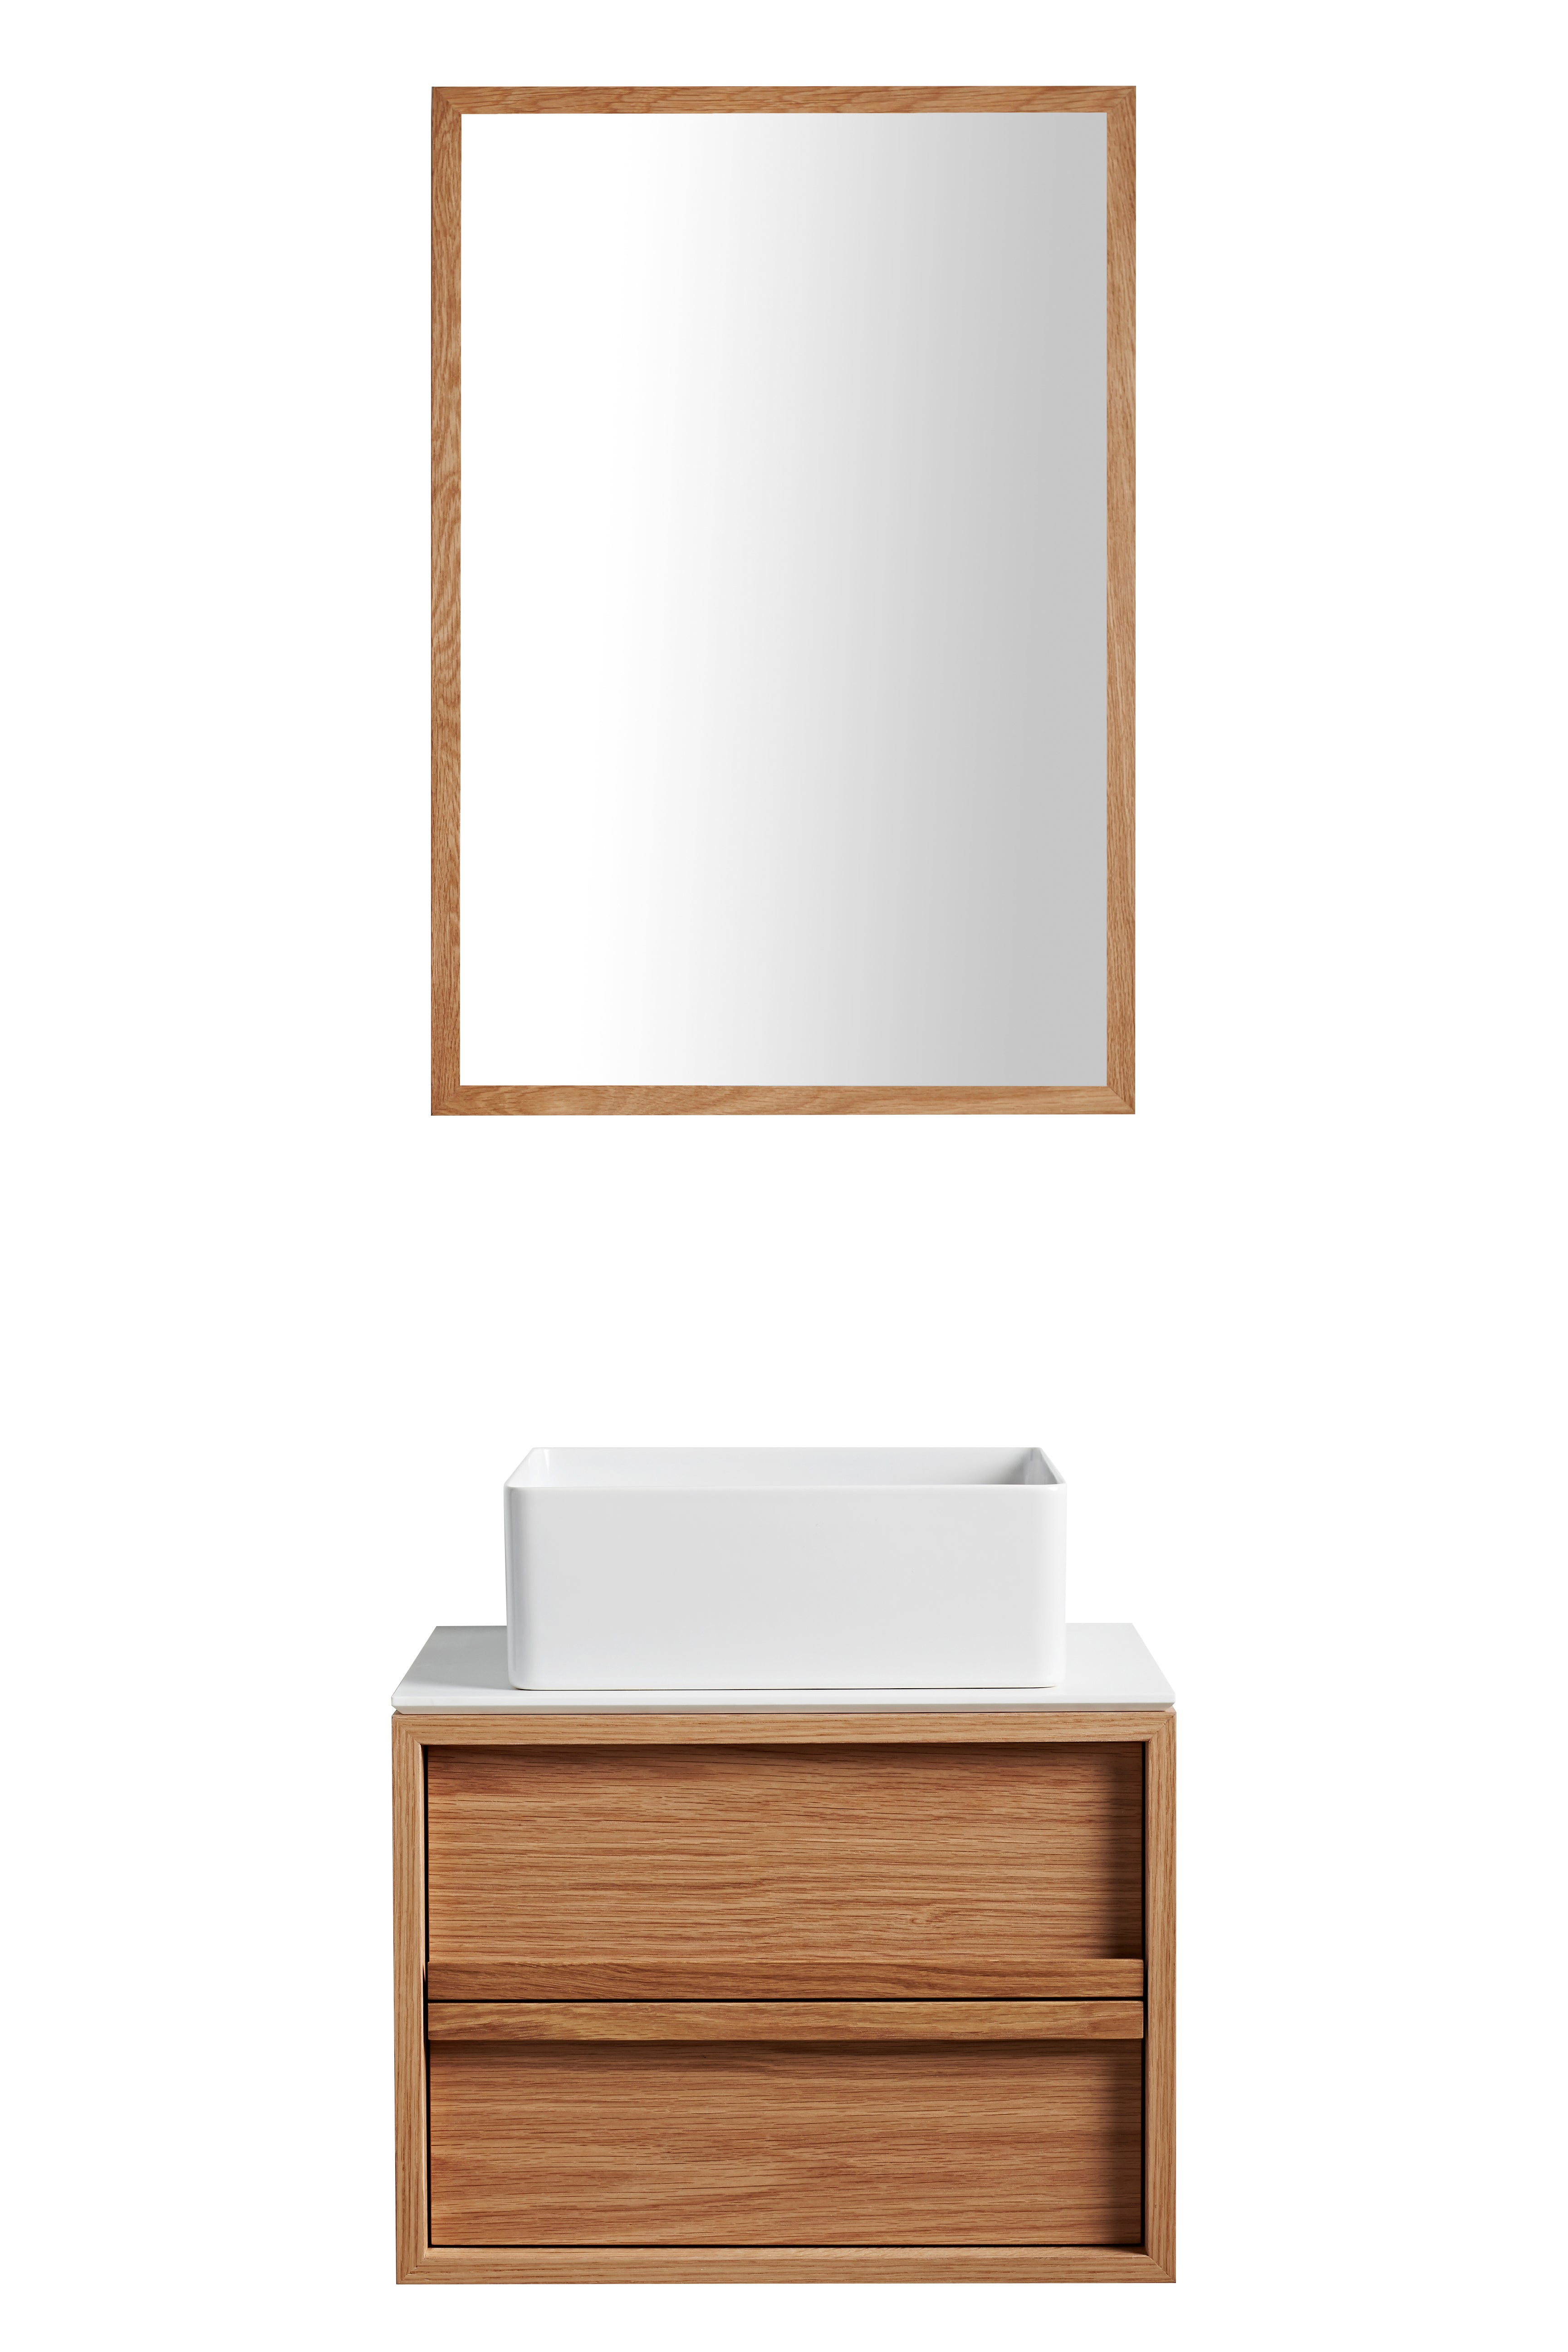 ISSY Z8 Butterfly Shaving Cabinet 500x930 - Zuster Furniture